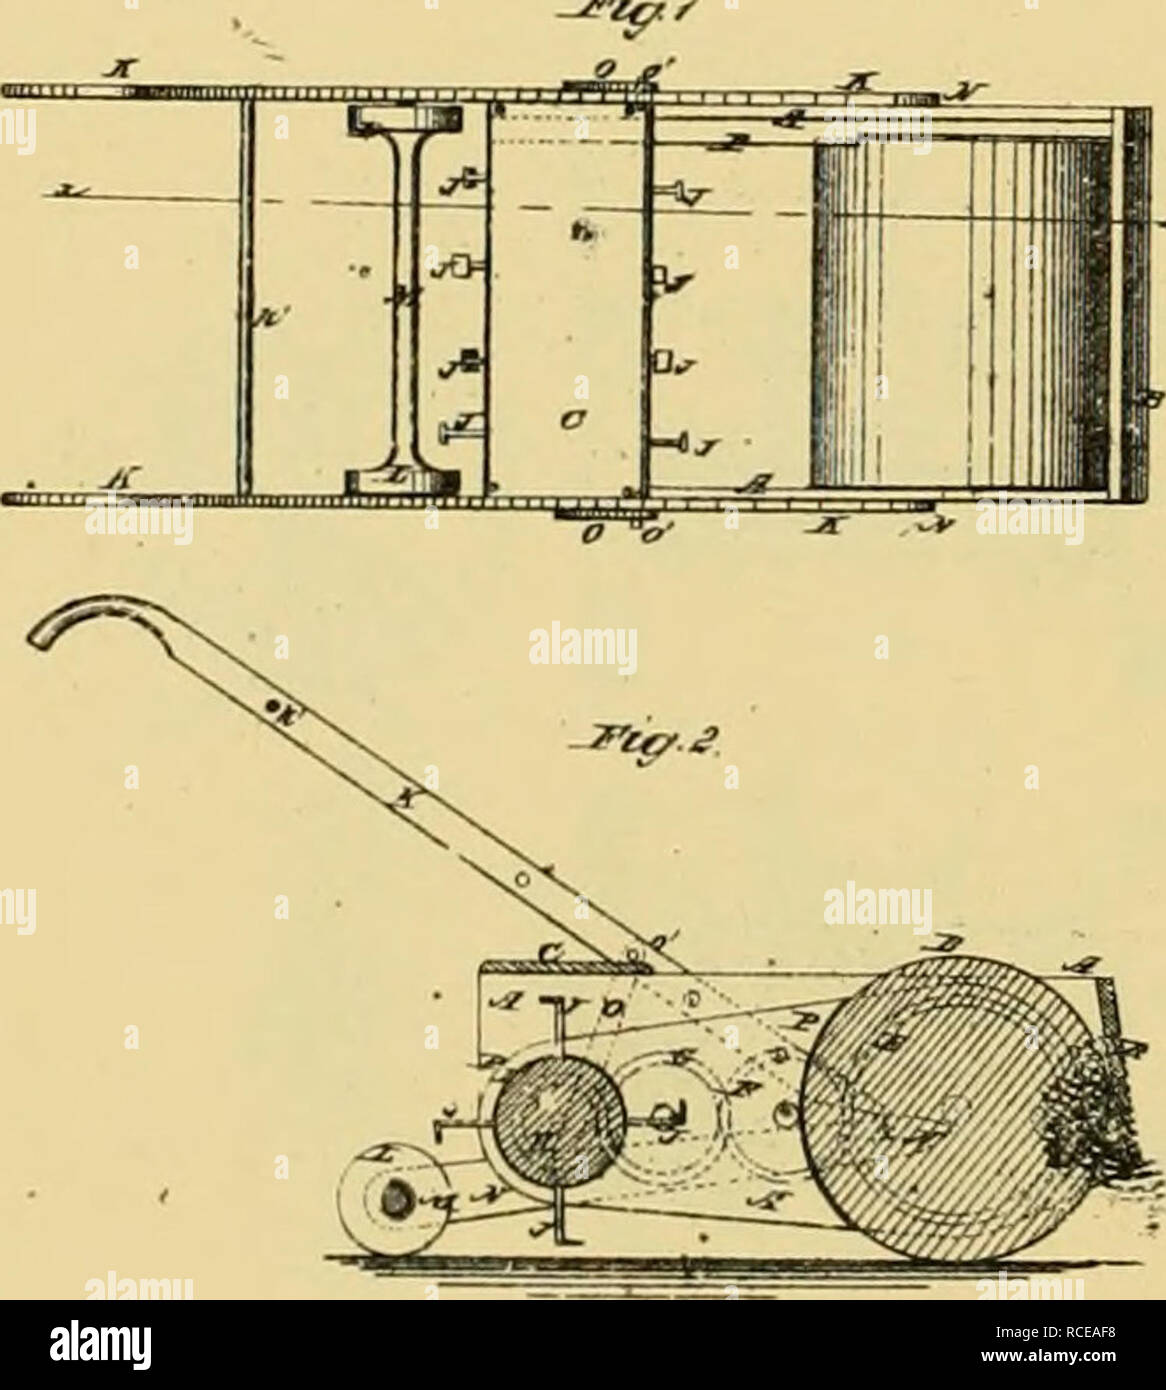 . Digest of agricultural implements, patented in the United States from A.D. 1789 to July 1881 ... Agricultural machinery; Patents. S. B. SBEKHiN. It570L7IHO GAKSZa ASD F1EJ.D BOB. Ho. 1S1.870. Flliiul Sigt. 5, 2Shists-Slieet 1. W. UcC. KAIBES. COUBiVED SFADino. FL0WIS7 AHD STALE-CUTTIVO SACSn^S. No. 181,959. FiUattd Sopt. S, 1876.. ri^iffJ .&gt;?«««^. Please note that these images are extracted from scanned page images that may have been digitally enhanced for readability - coloration and appearance of these illustrations may not perfectly resemble the original work.. Allen, James T. (James T Stock Photo